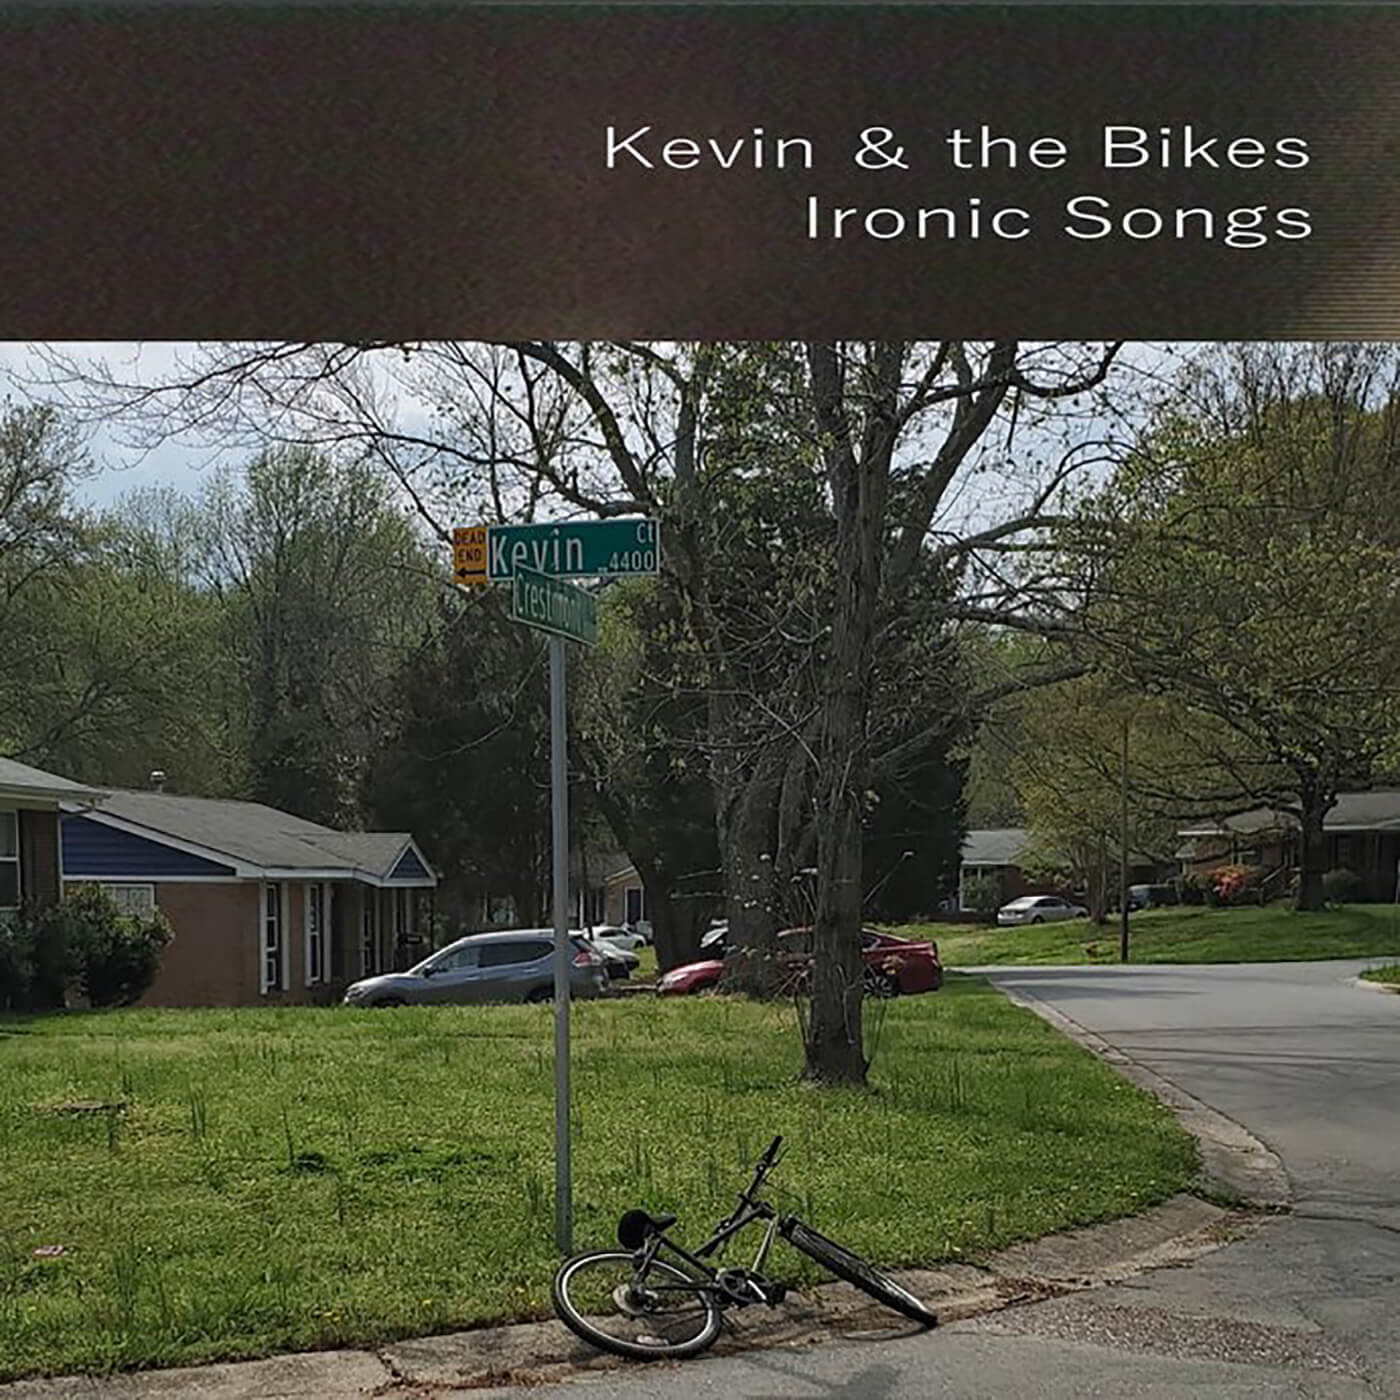 AOTY - Kevin & The Bikes